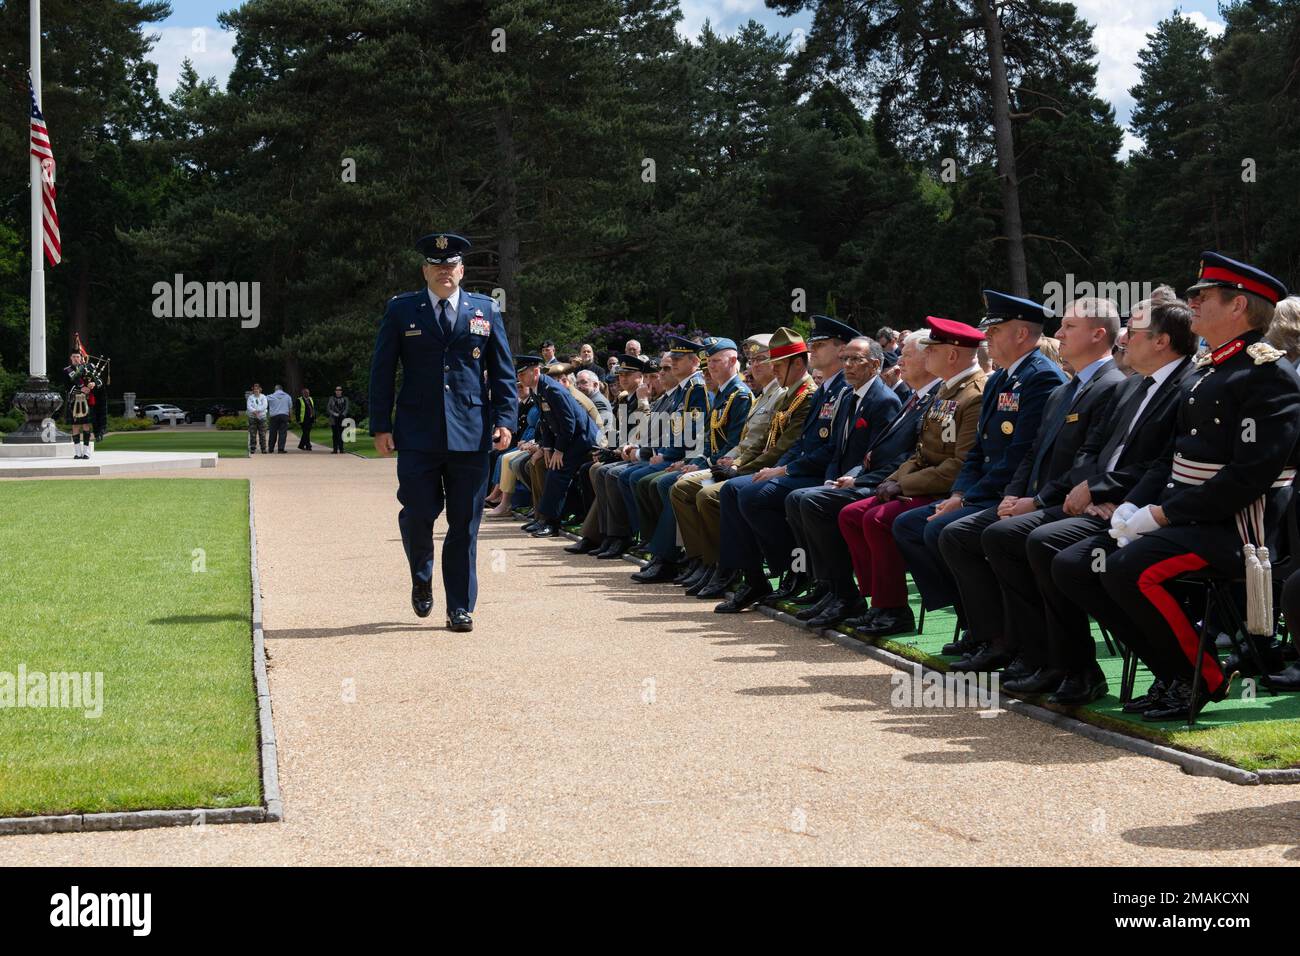 U.S. Air Force Col. Brian Filler, 501st Combat Support Wing commander, prepares to lay a wreath during a Memorial Day ceremony at the Brookwood American Military Cemetery, England, May 29, 2022. Memorial Day provides us a solemn opportunity to remember our fallen brothers and sisters in arms, reflect upon their courageous sacrifice, and show gratitude for the freedom they gave their lives to defend. It also affords us the opportunity to pay homage to those families who lost their loved ones in service to the Nation-and continue to feel the full weight of that sacrifice today. Stock Photo